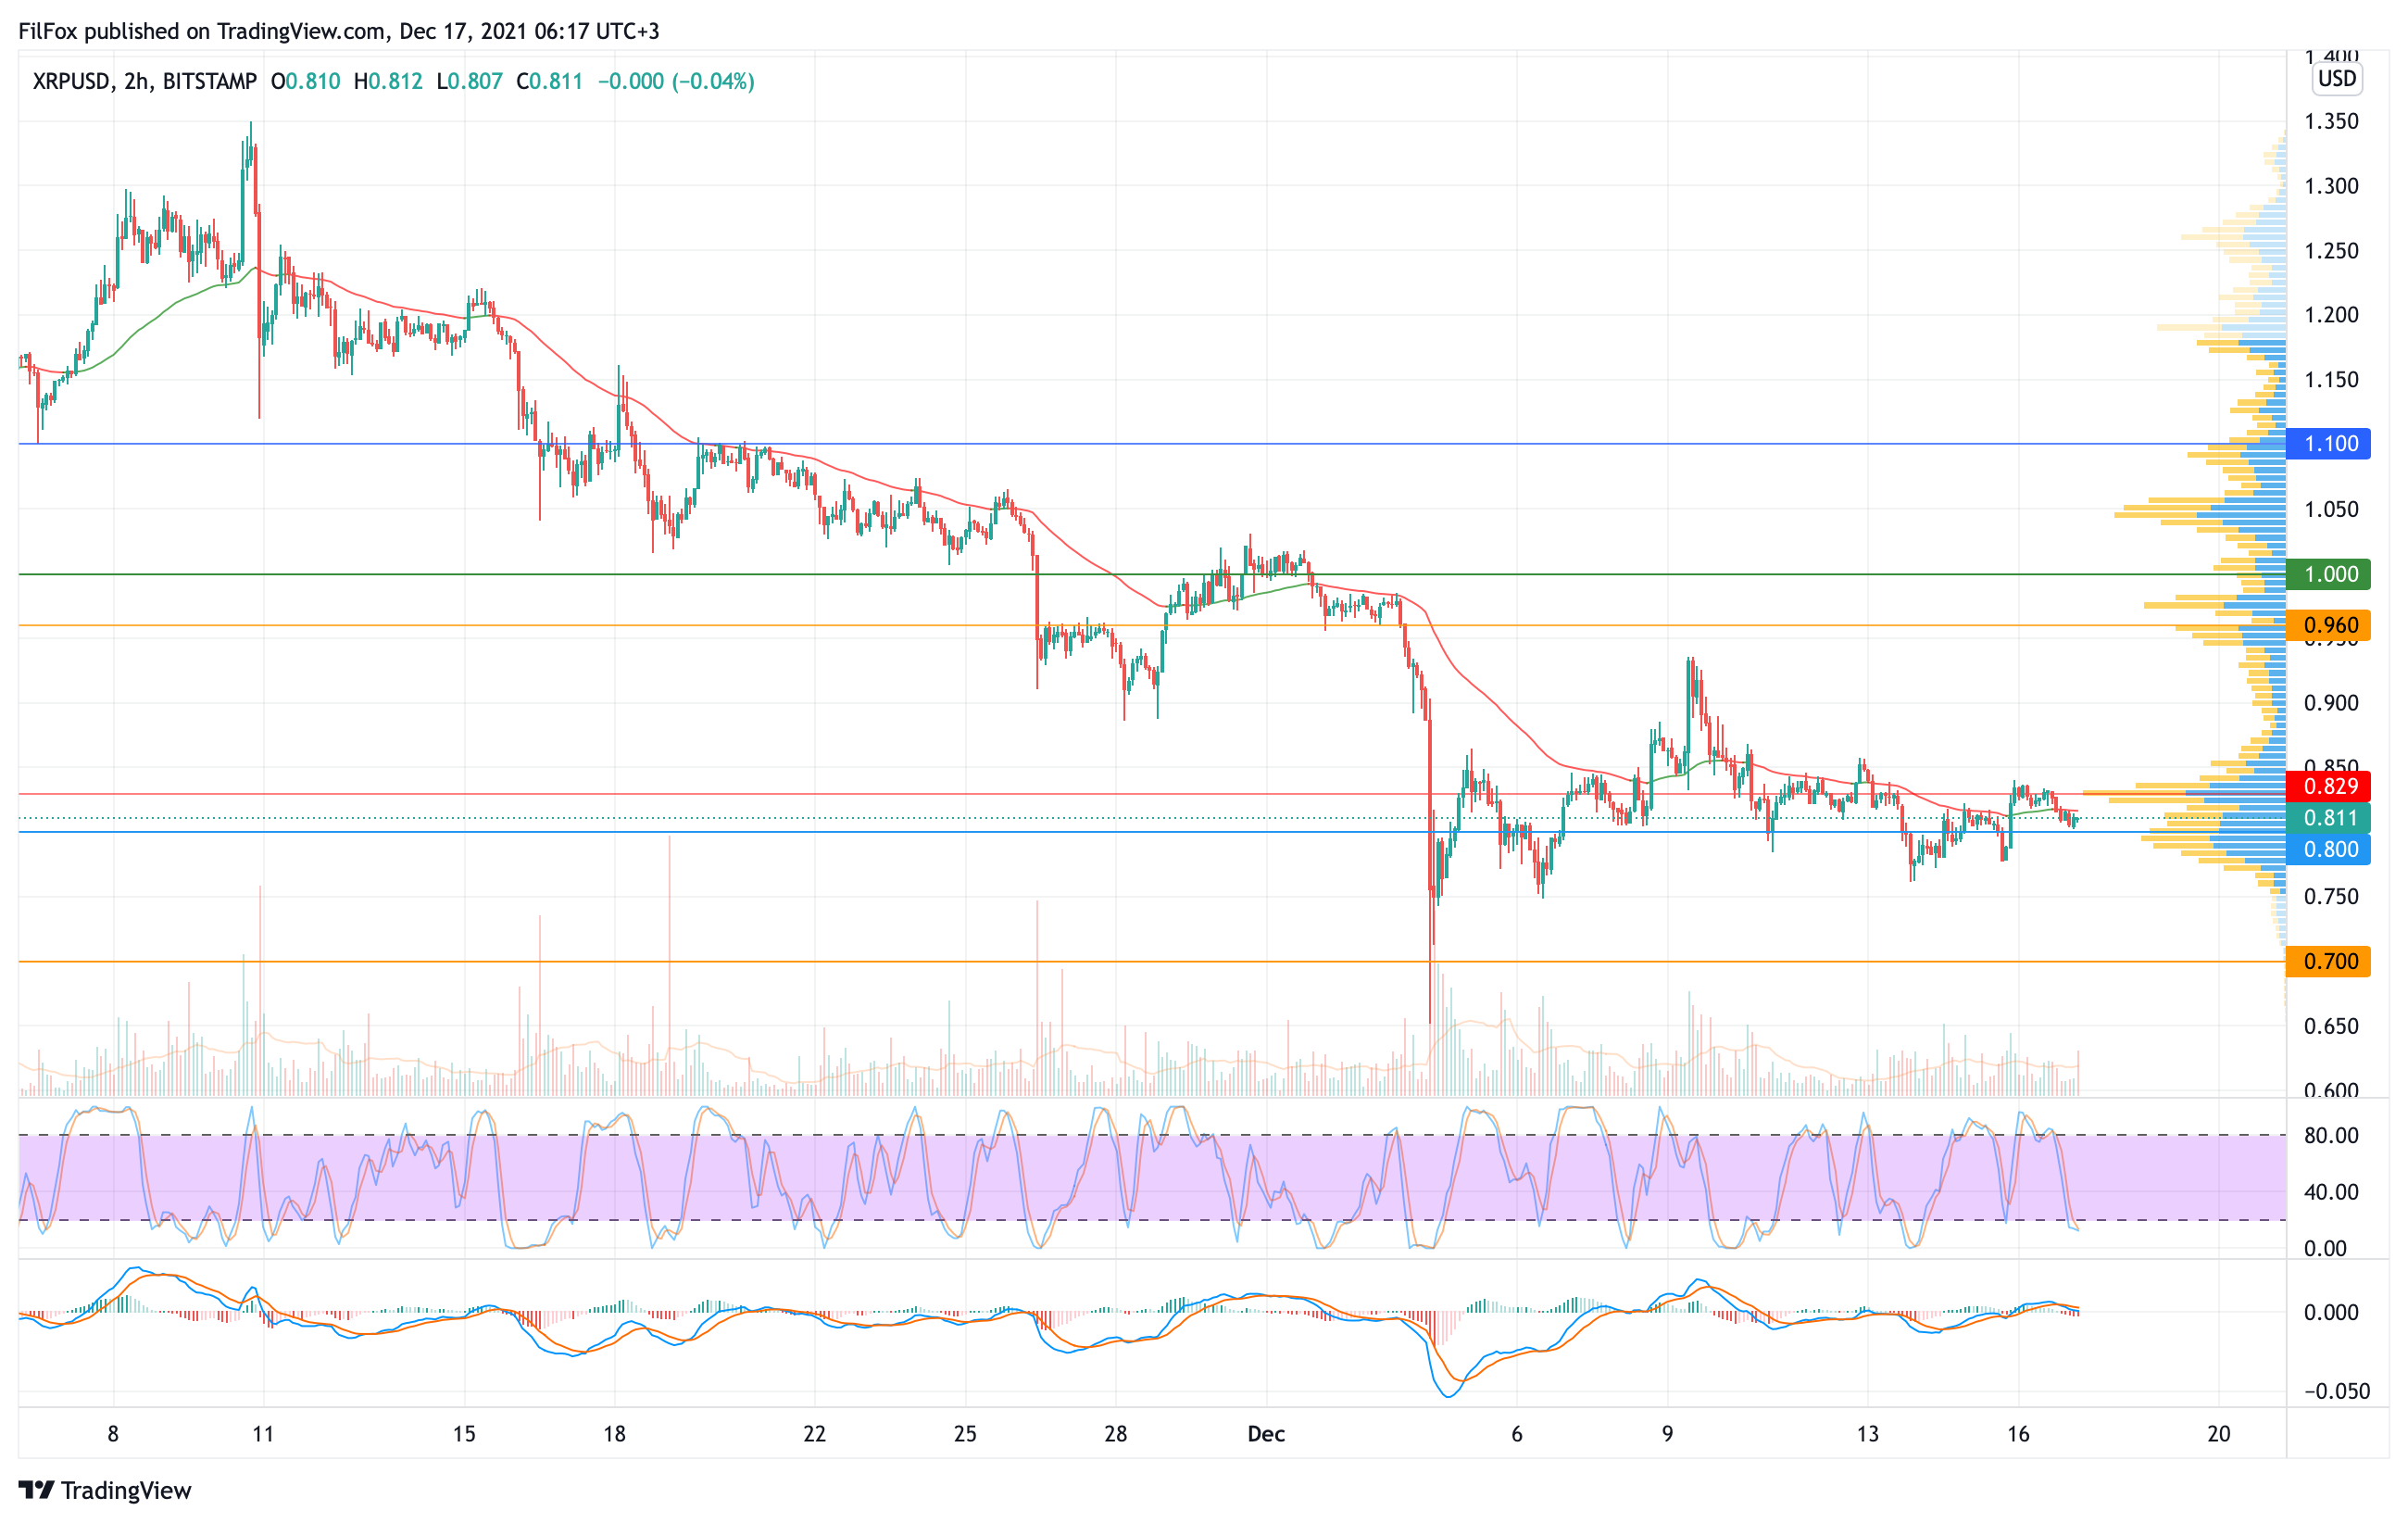 Analysis of the prices of Bitcoin, Ethereum, XRP for 12/17/2021